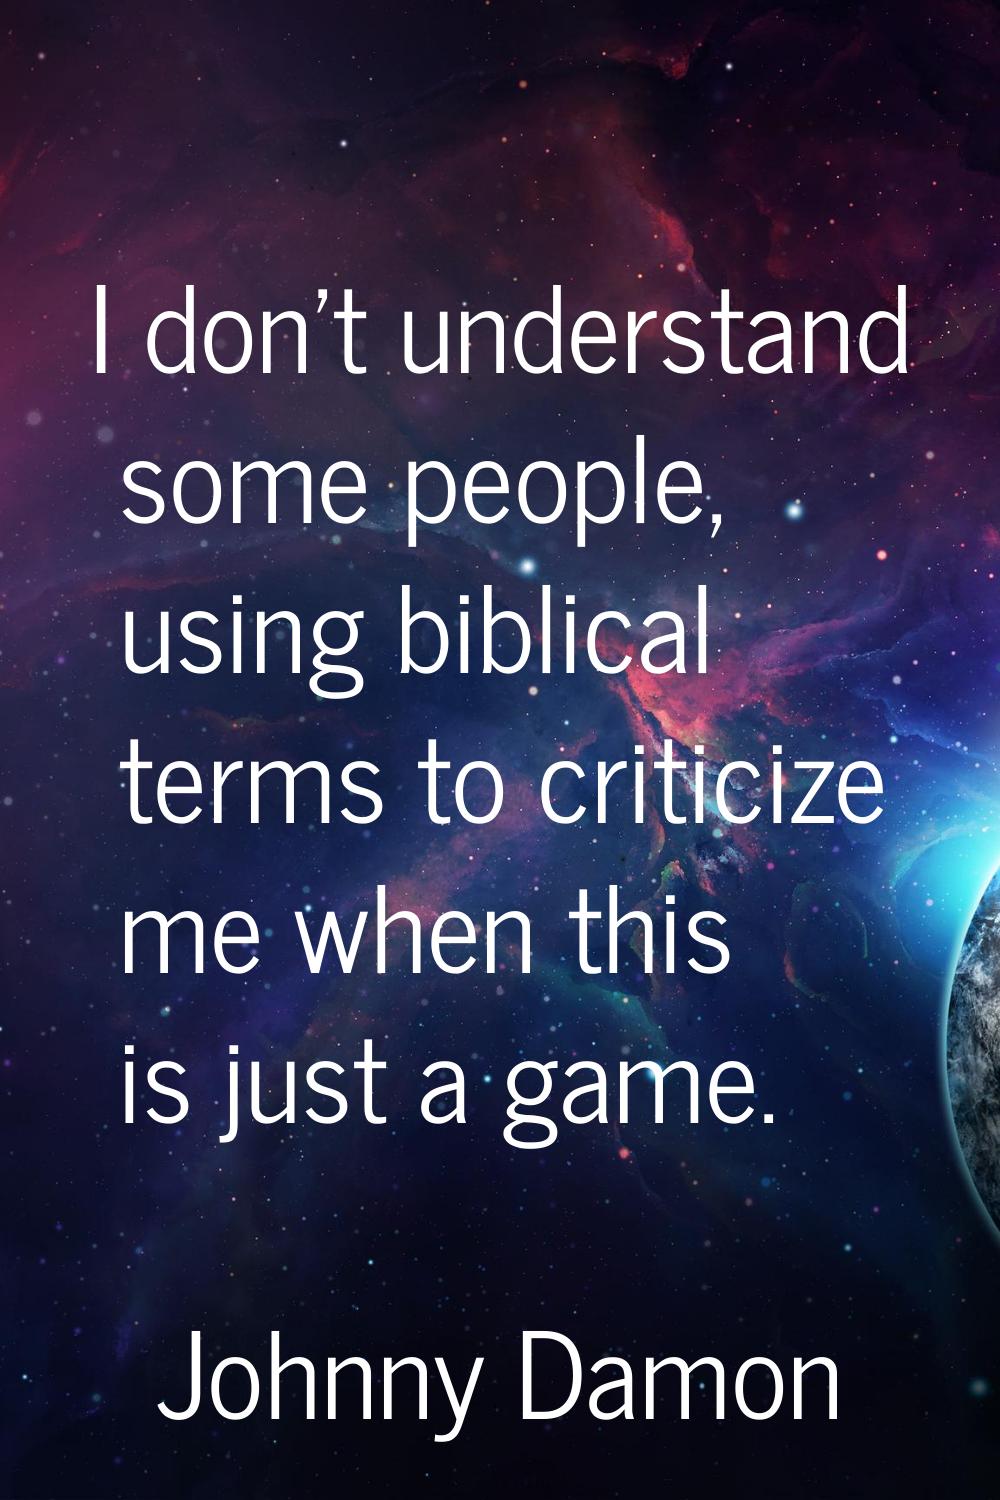 I don't understand some people, using biblical terms to criticize me when this is just a game.